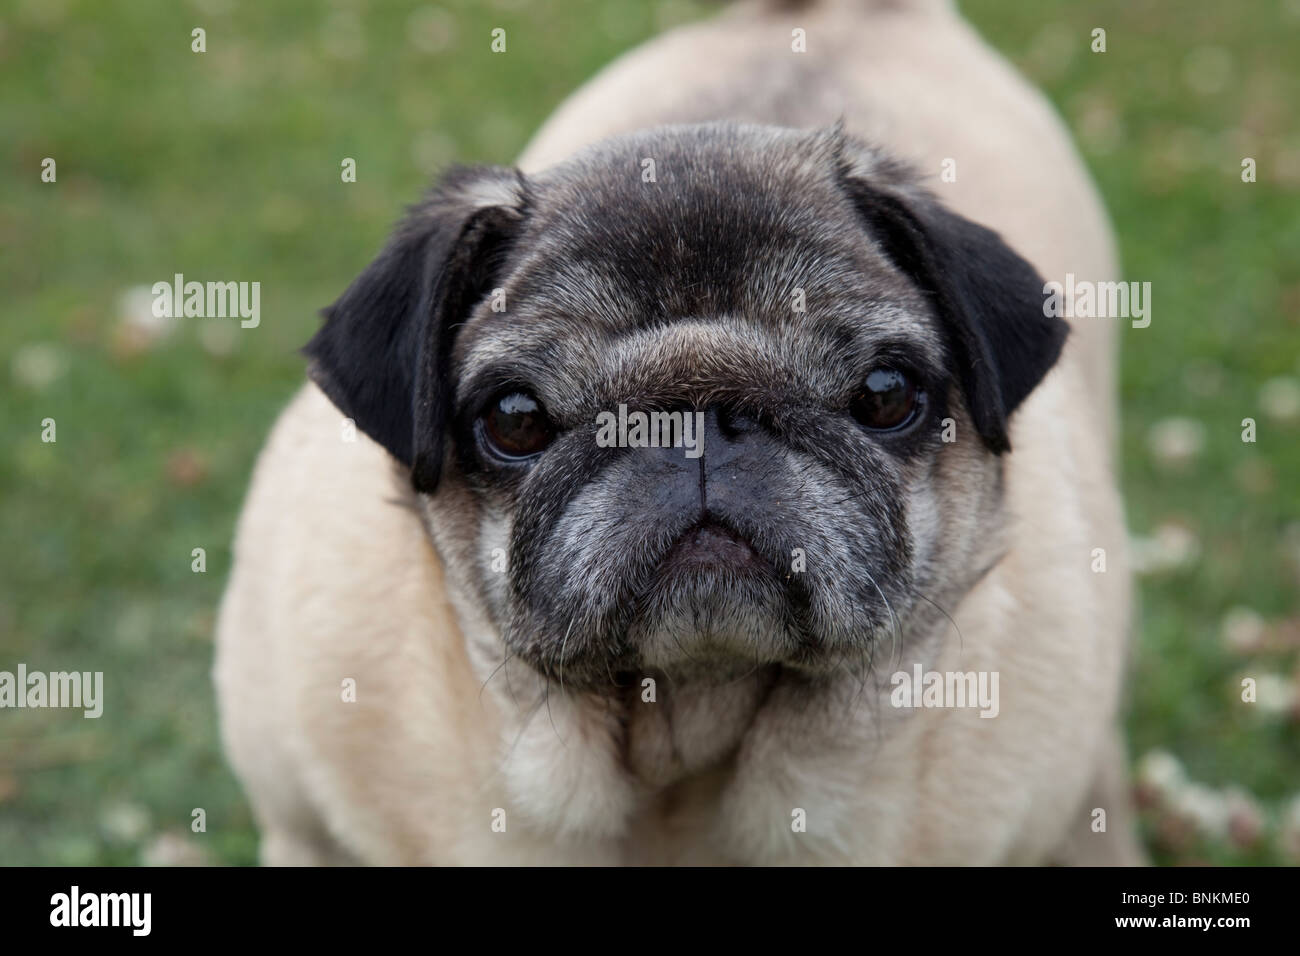 Portrait of Chinese pug a small dog with short wrinkly muzzled face and curly tail UK Stock Photo